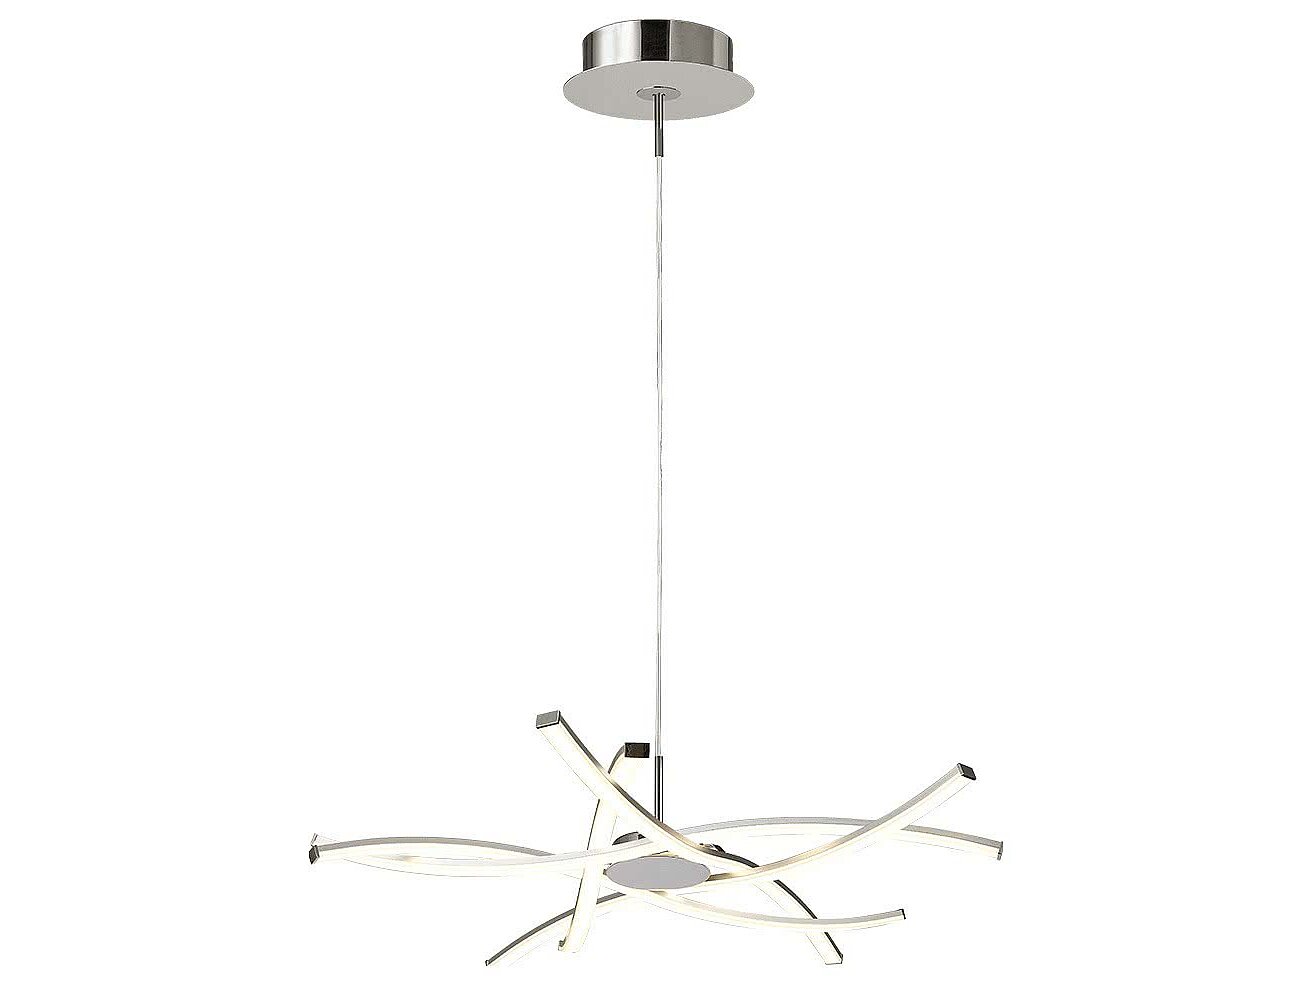   Mantra Aire Led 5914